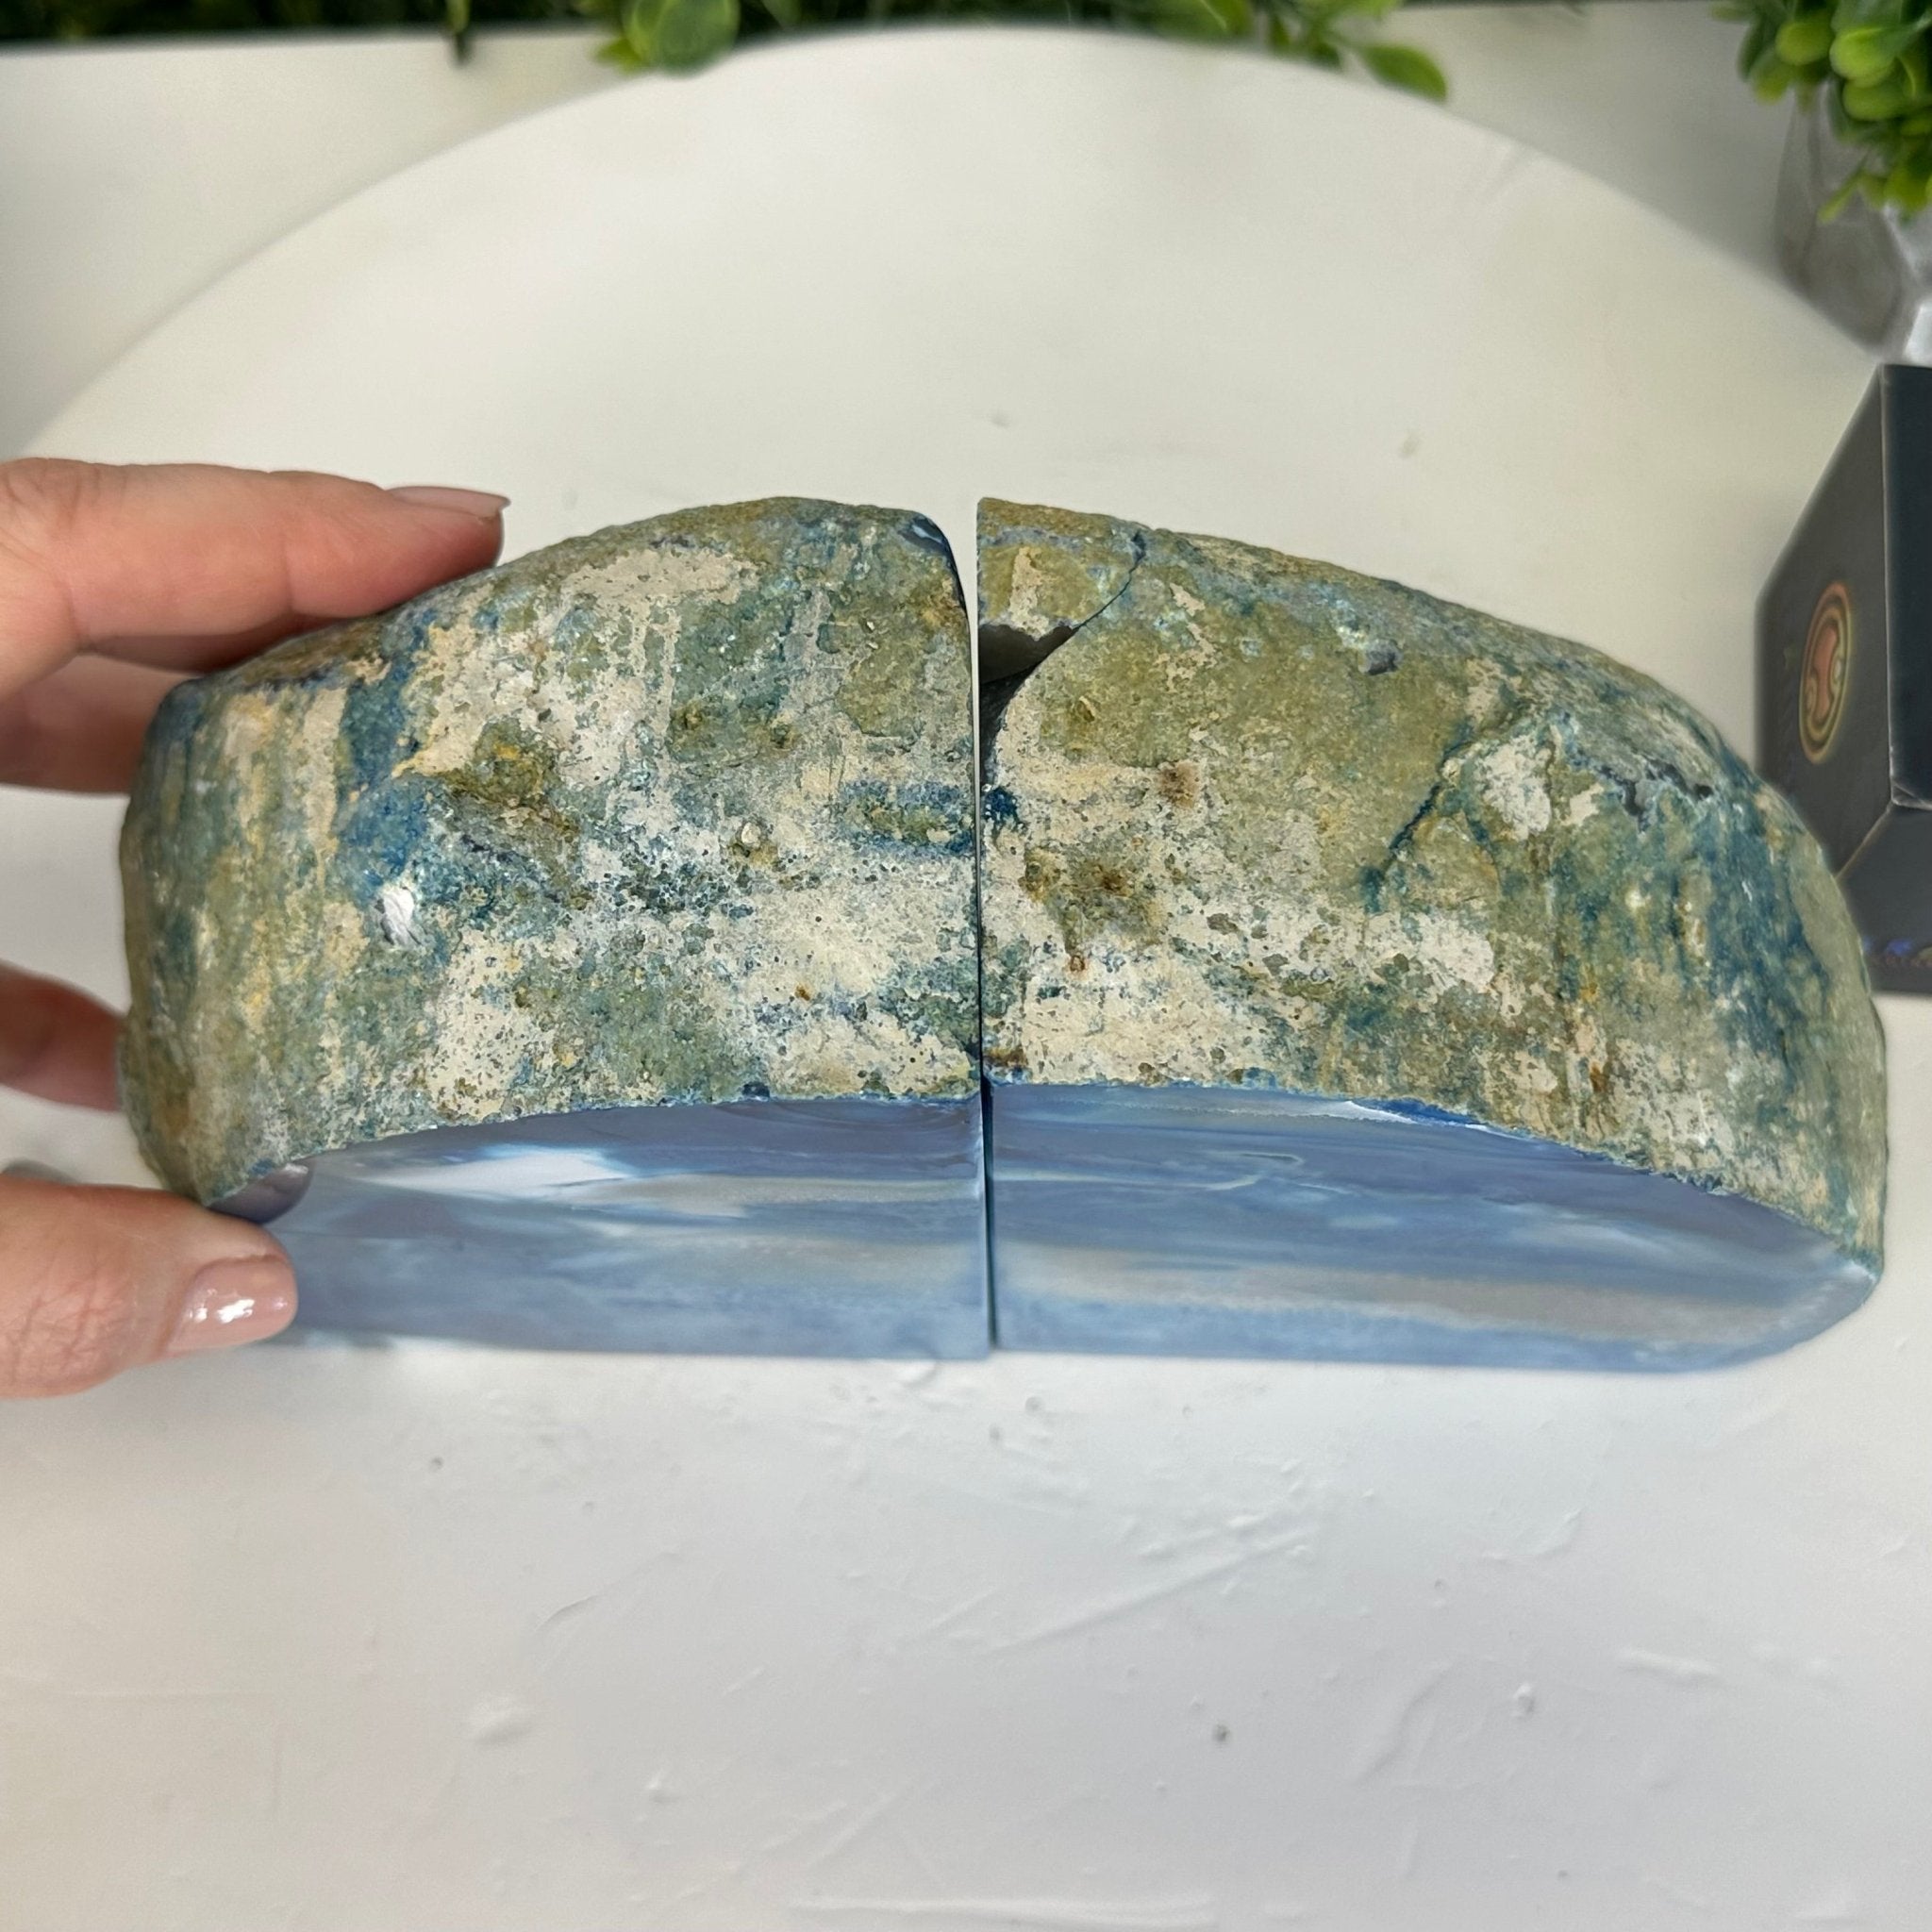 Blue Dyed Brazilian Agate Stone Bookends, 9.7 lbs & 5" tall #5151BL-041 - Brazil GemsBrazil GemsBlue Dyed Brazilian Agate Stone Bookends, 9.7 lbs & 5" tall #5151BL-041Bookends5151BL-041